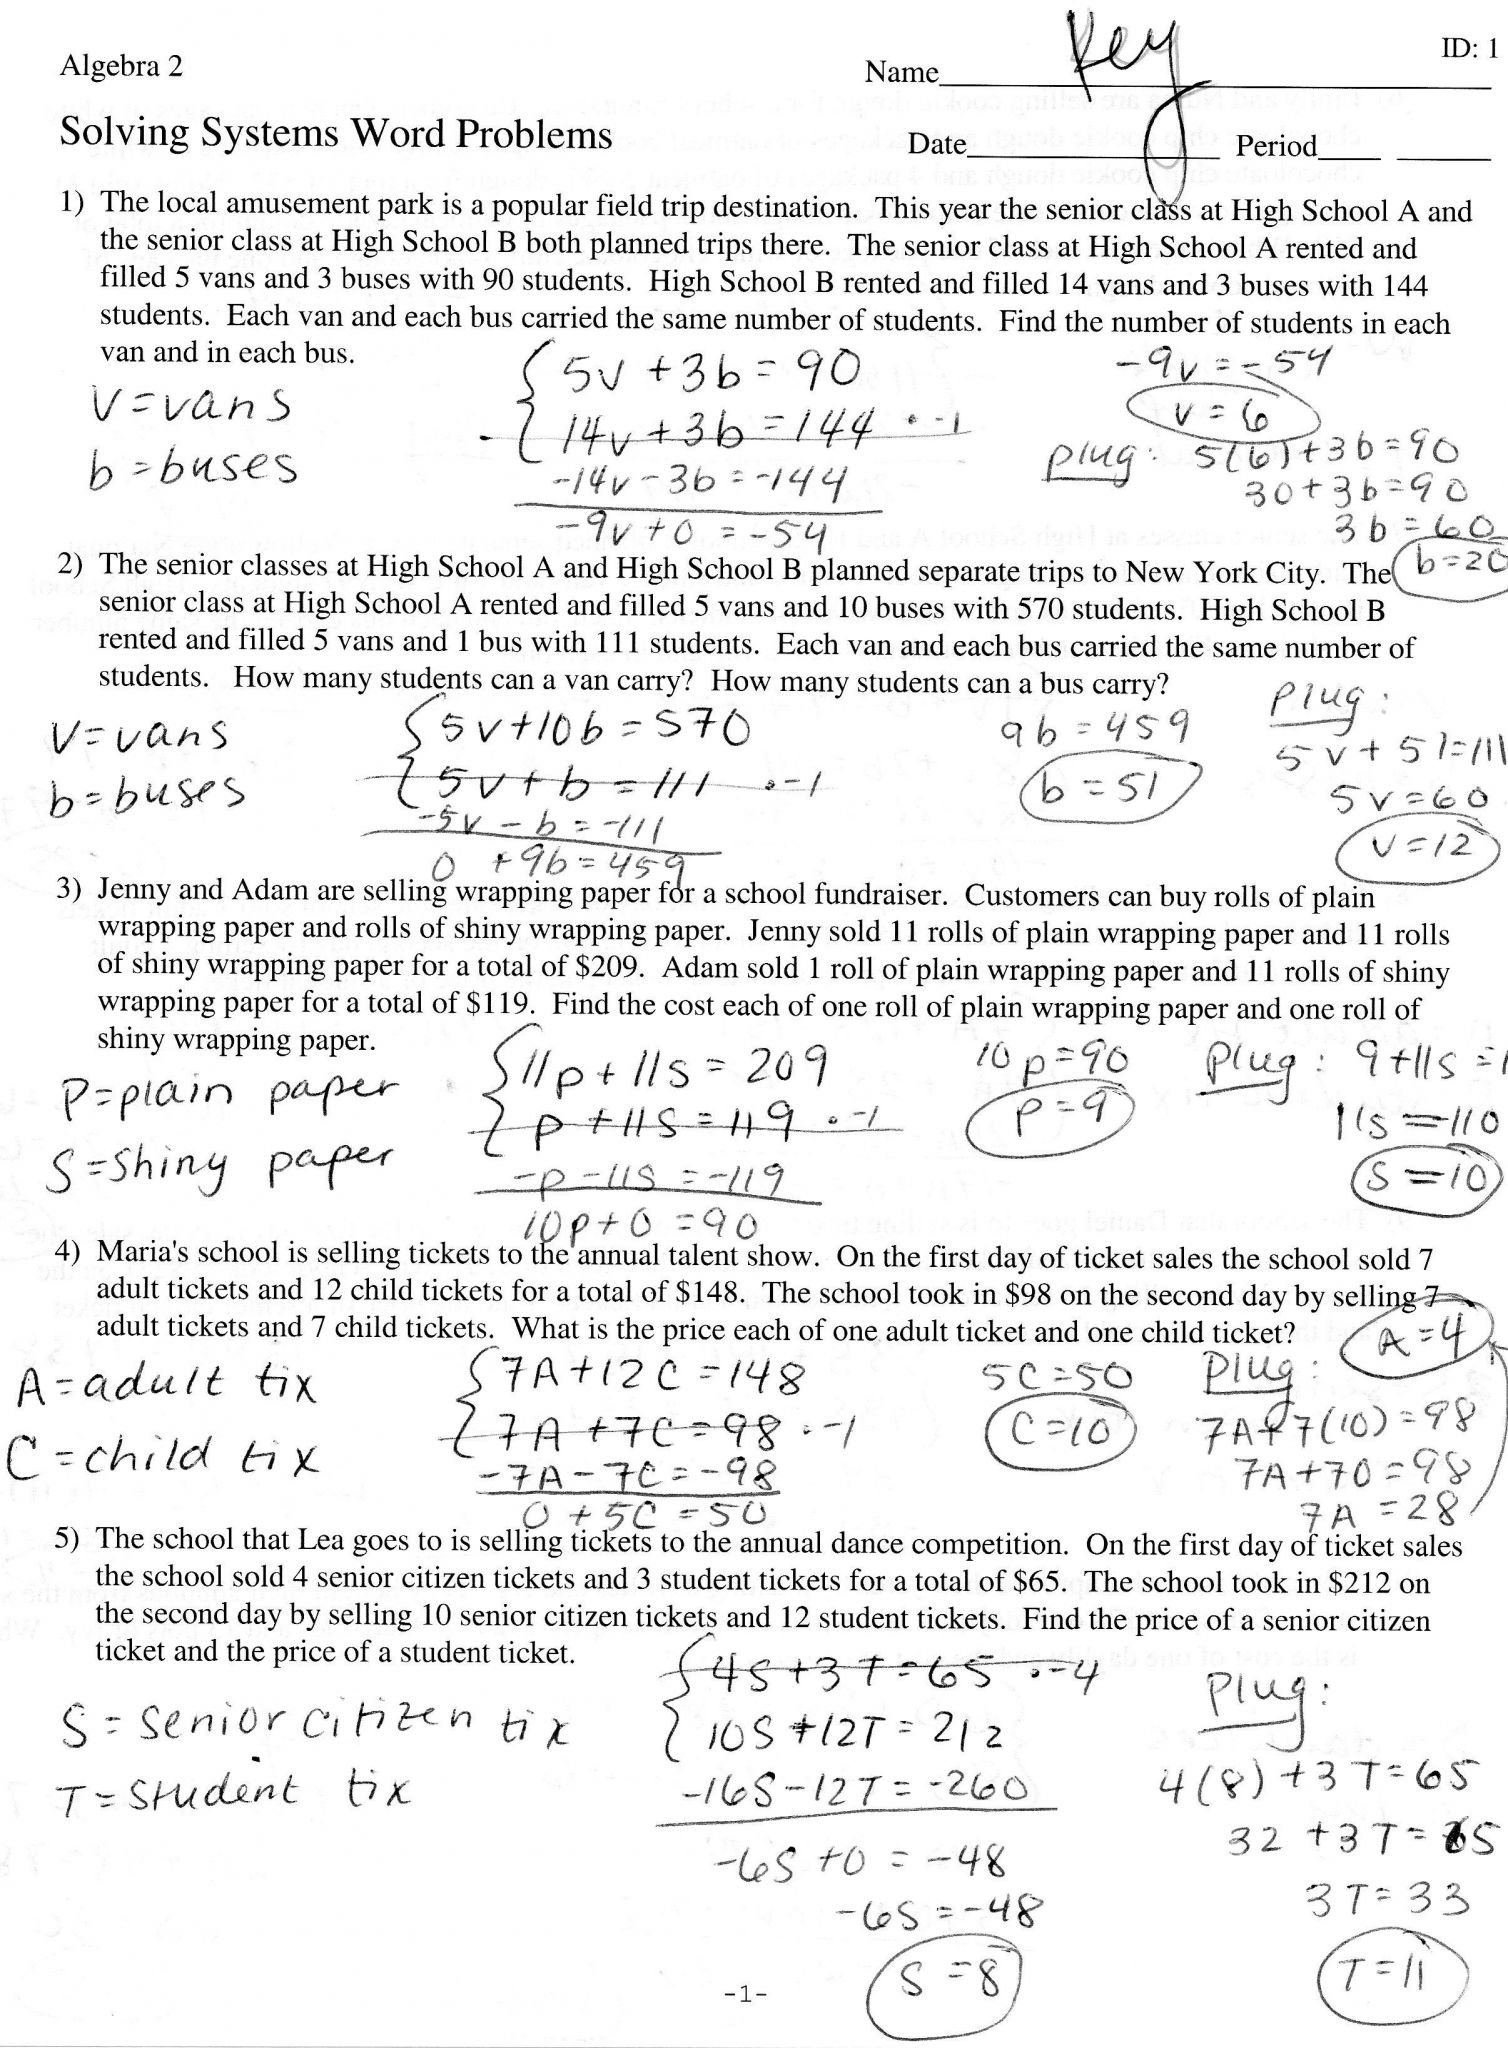 Systems Of Linear Equations Word Problems Worksheet Answers Regarding Systems Word Problems Worksheet